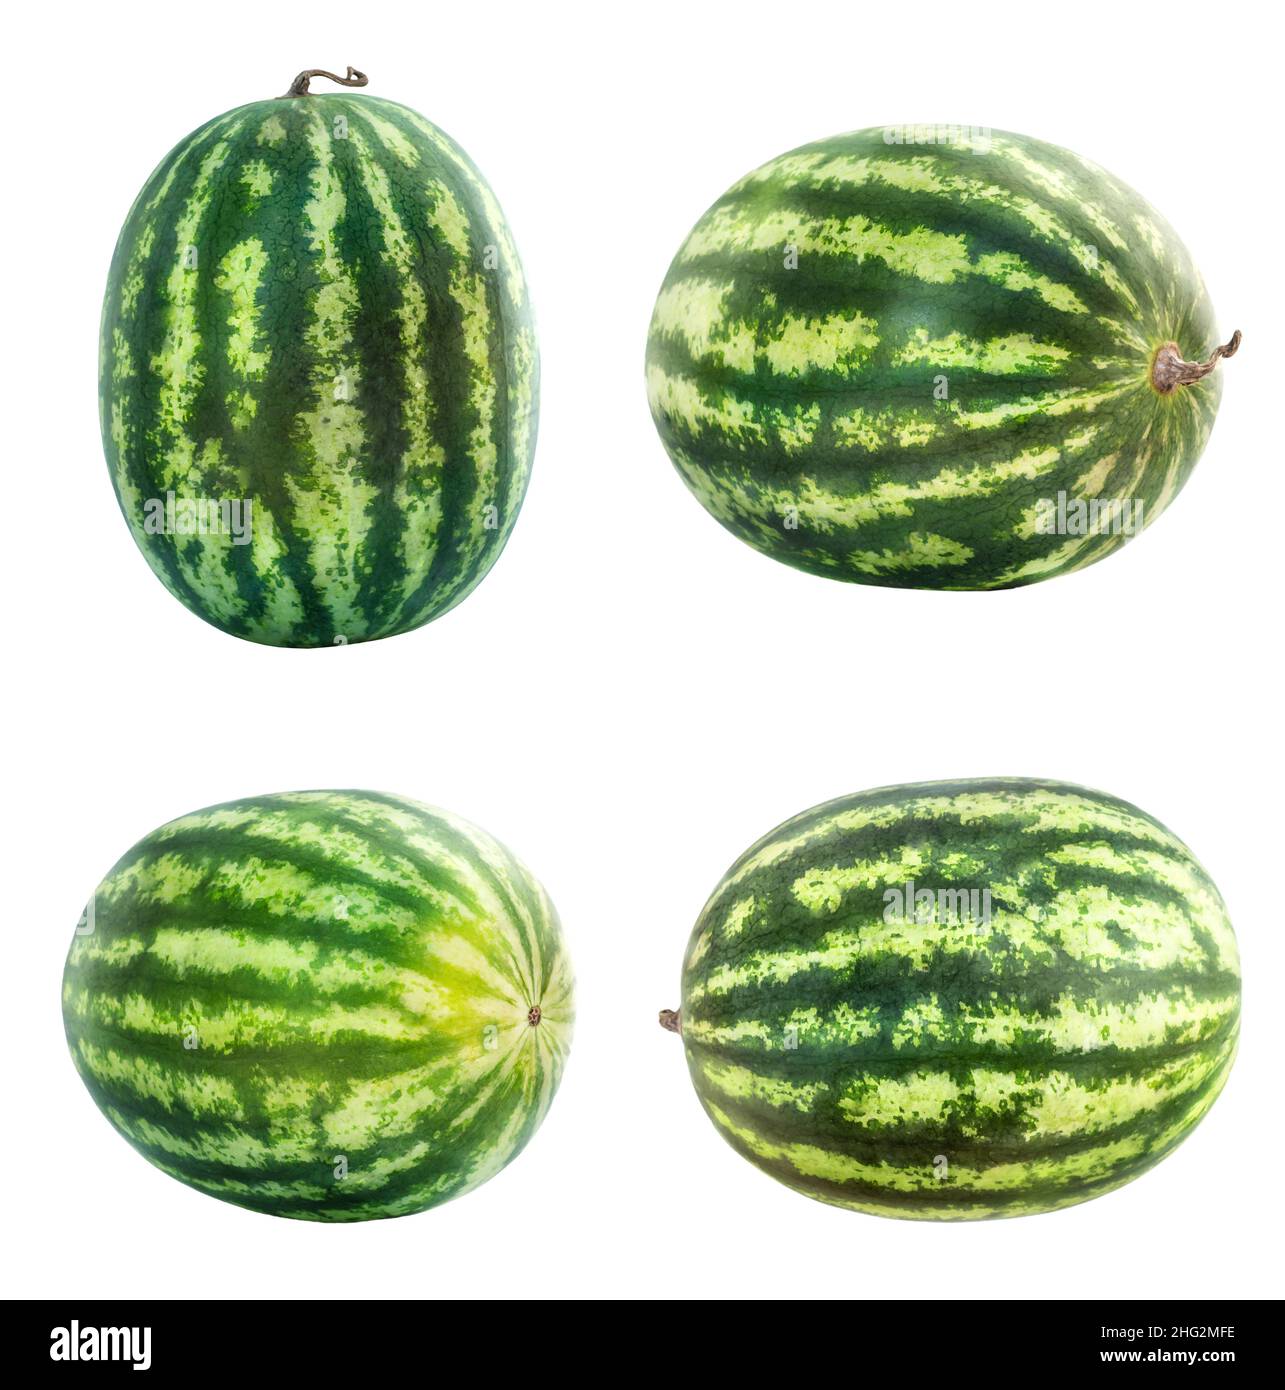 Fresh watermelon whole collection isolated on white background Stock Photo